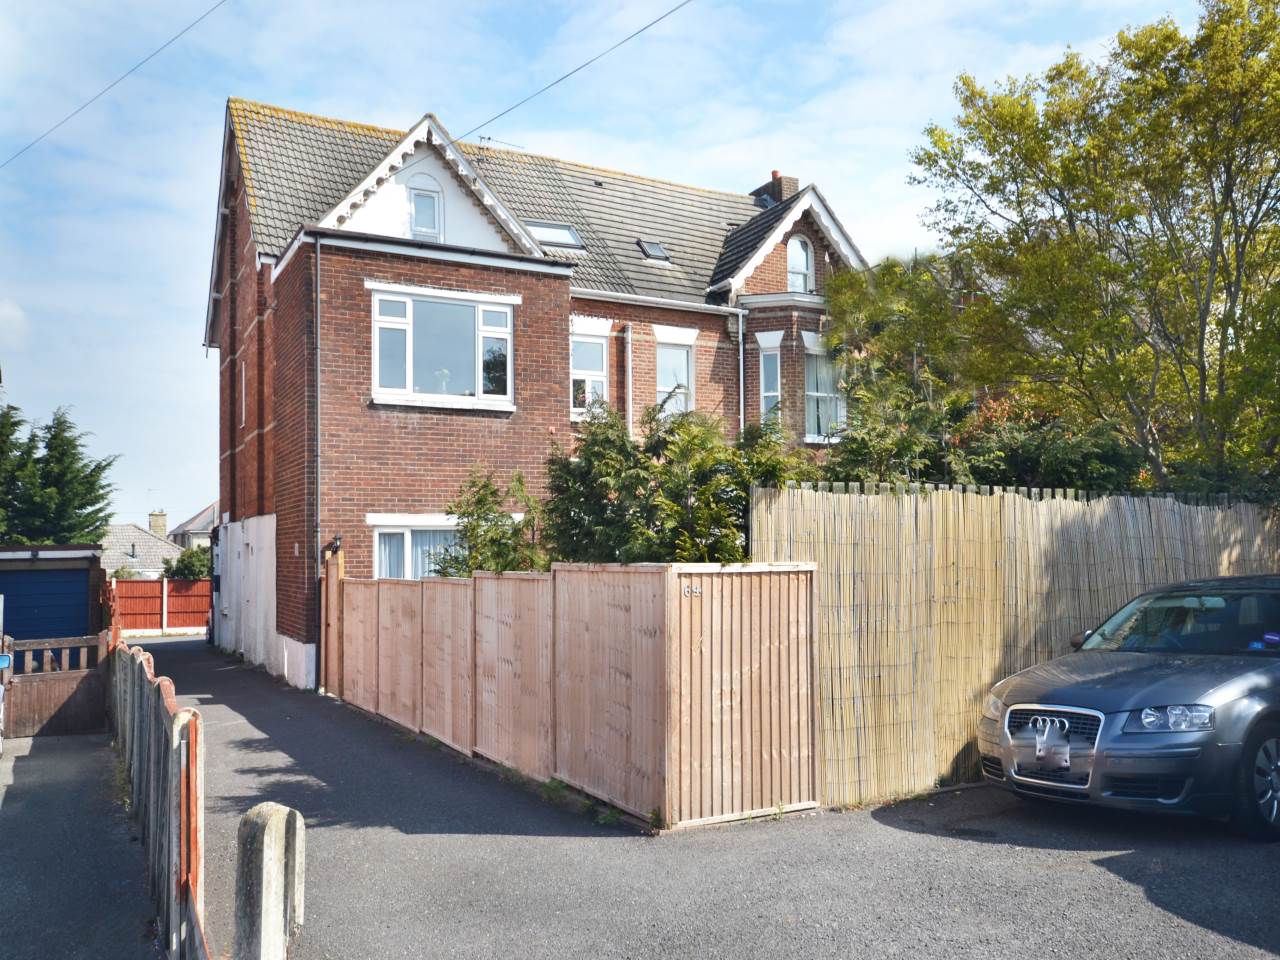 CLOSE TO UNIVERSITY* STUNNING FIRST FLOOR CONVERTED FLAT WITH GARAGE * SHARE OF FREEHOLD * TWO DOUBLE BEDROOMS * MODERN BATHROOM AND KITCHEN * CLOSE TO UNIVERSITY AND EXCELLENT LOCAL SCHOOLS * EASY ACCESS TO BOTH POOLE AND BOURNEMOUTH*